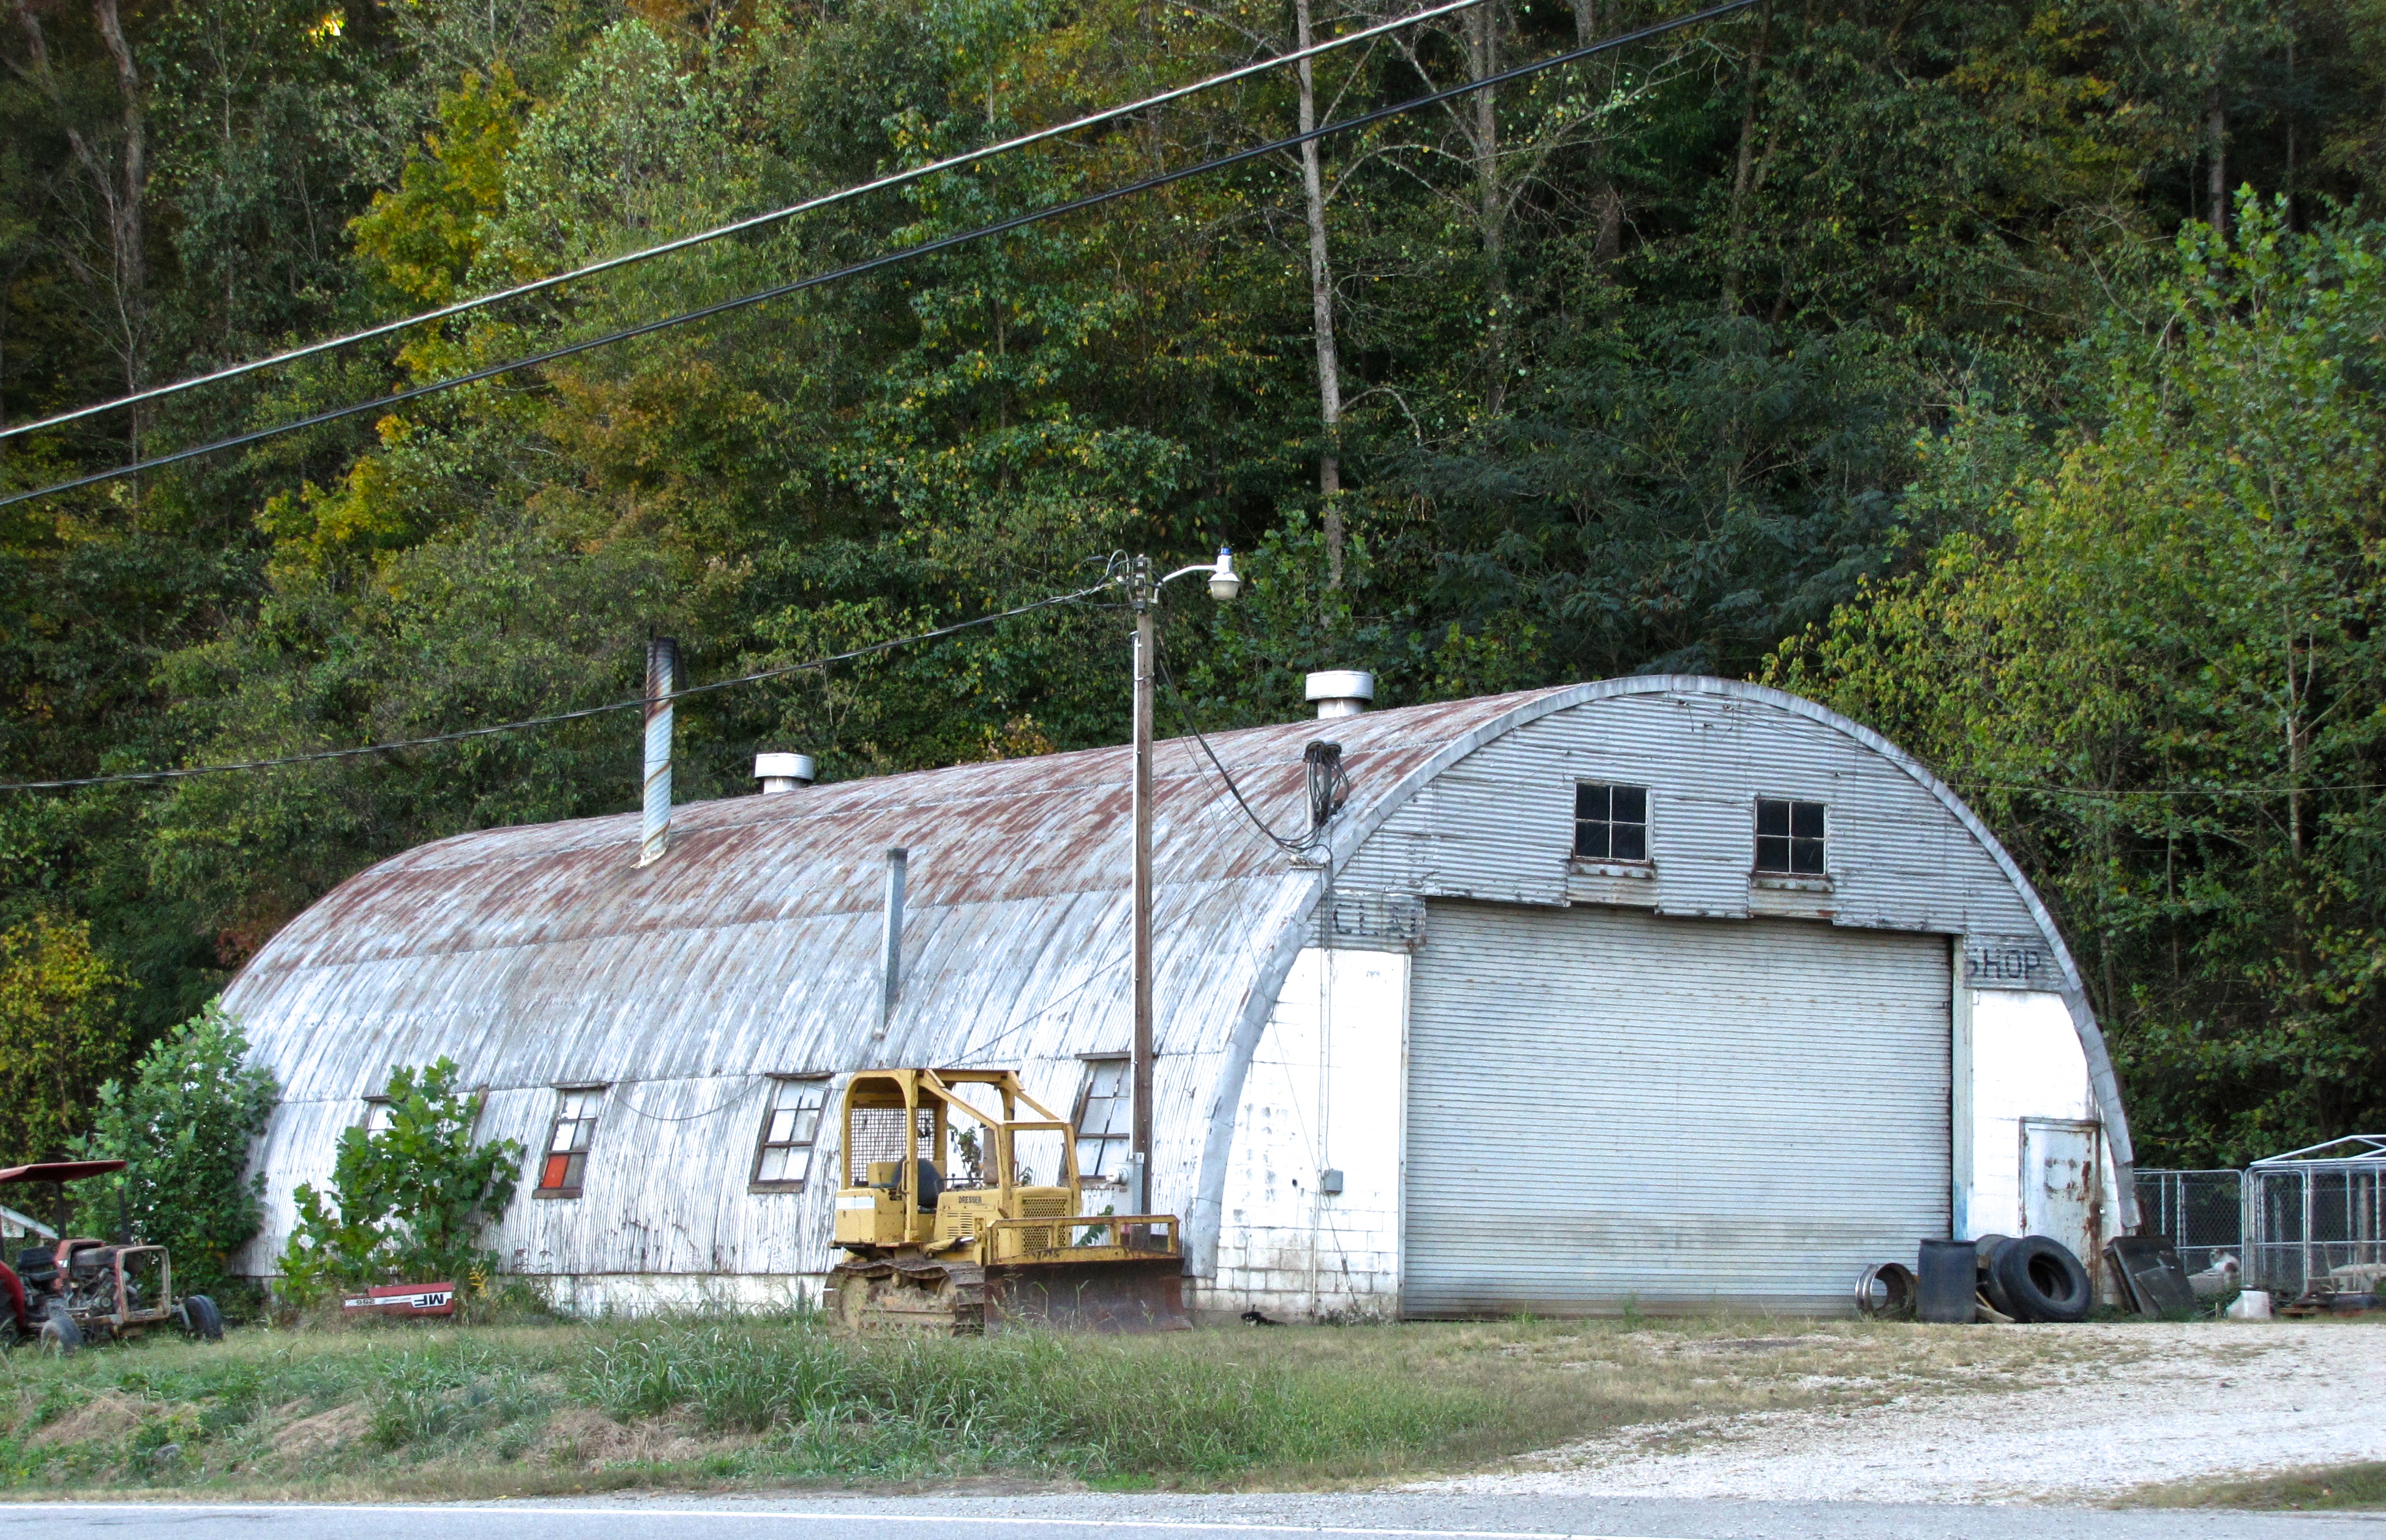 quonset hut in Ames, IA